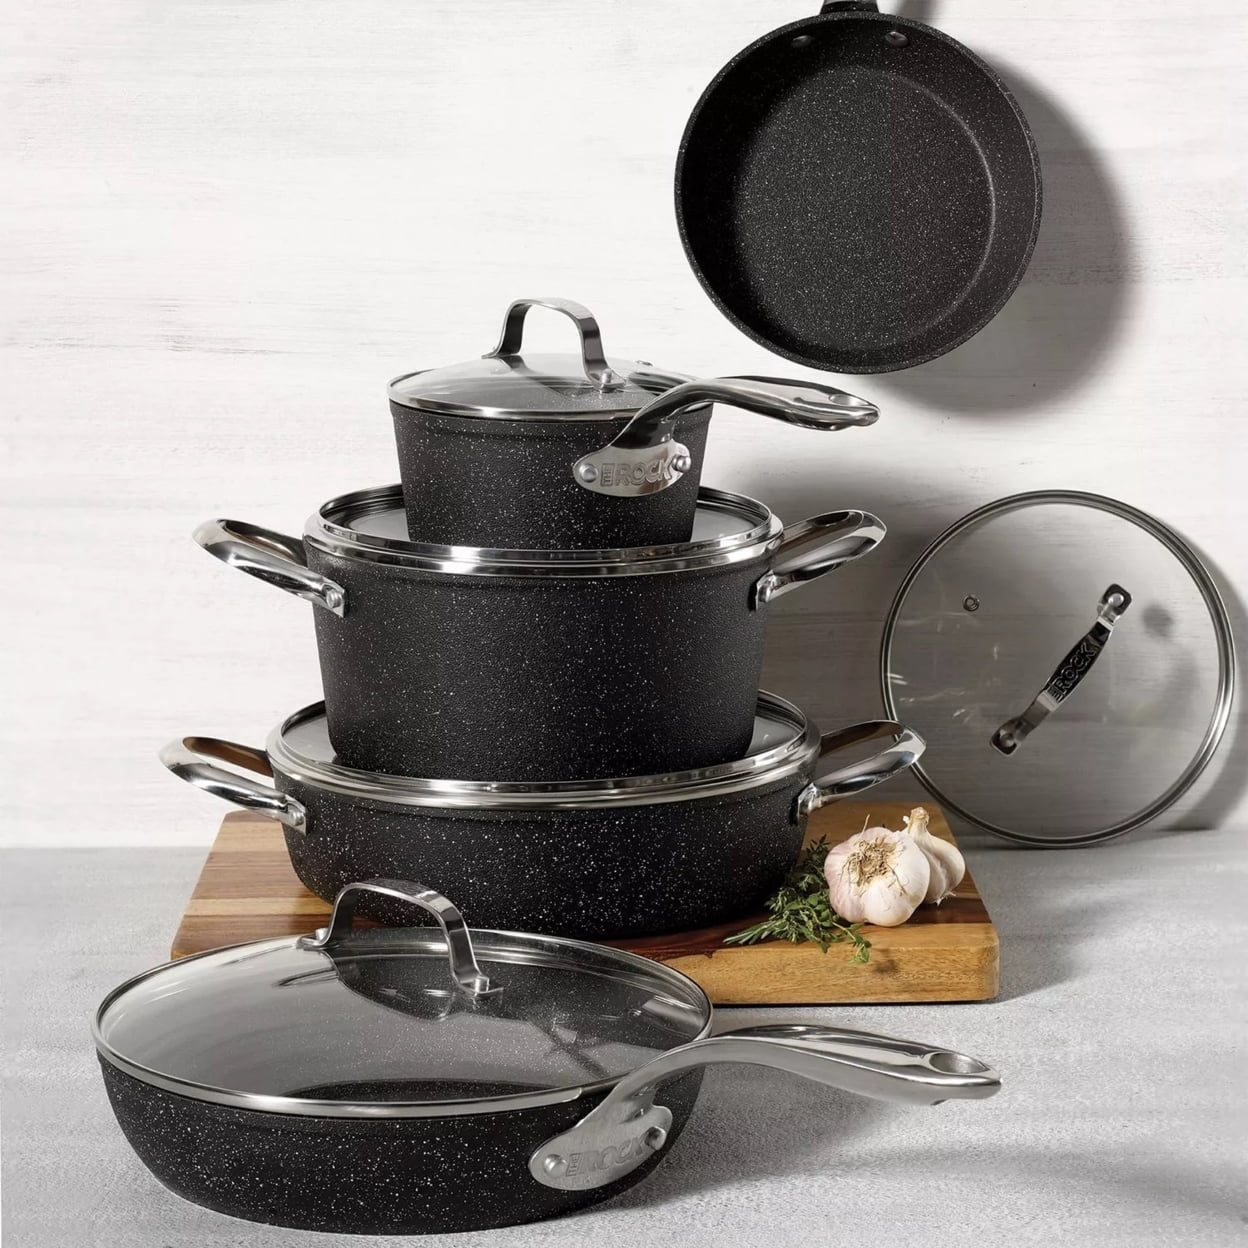 The Rock by Starfrit 10-Piece Cookware Set 